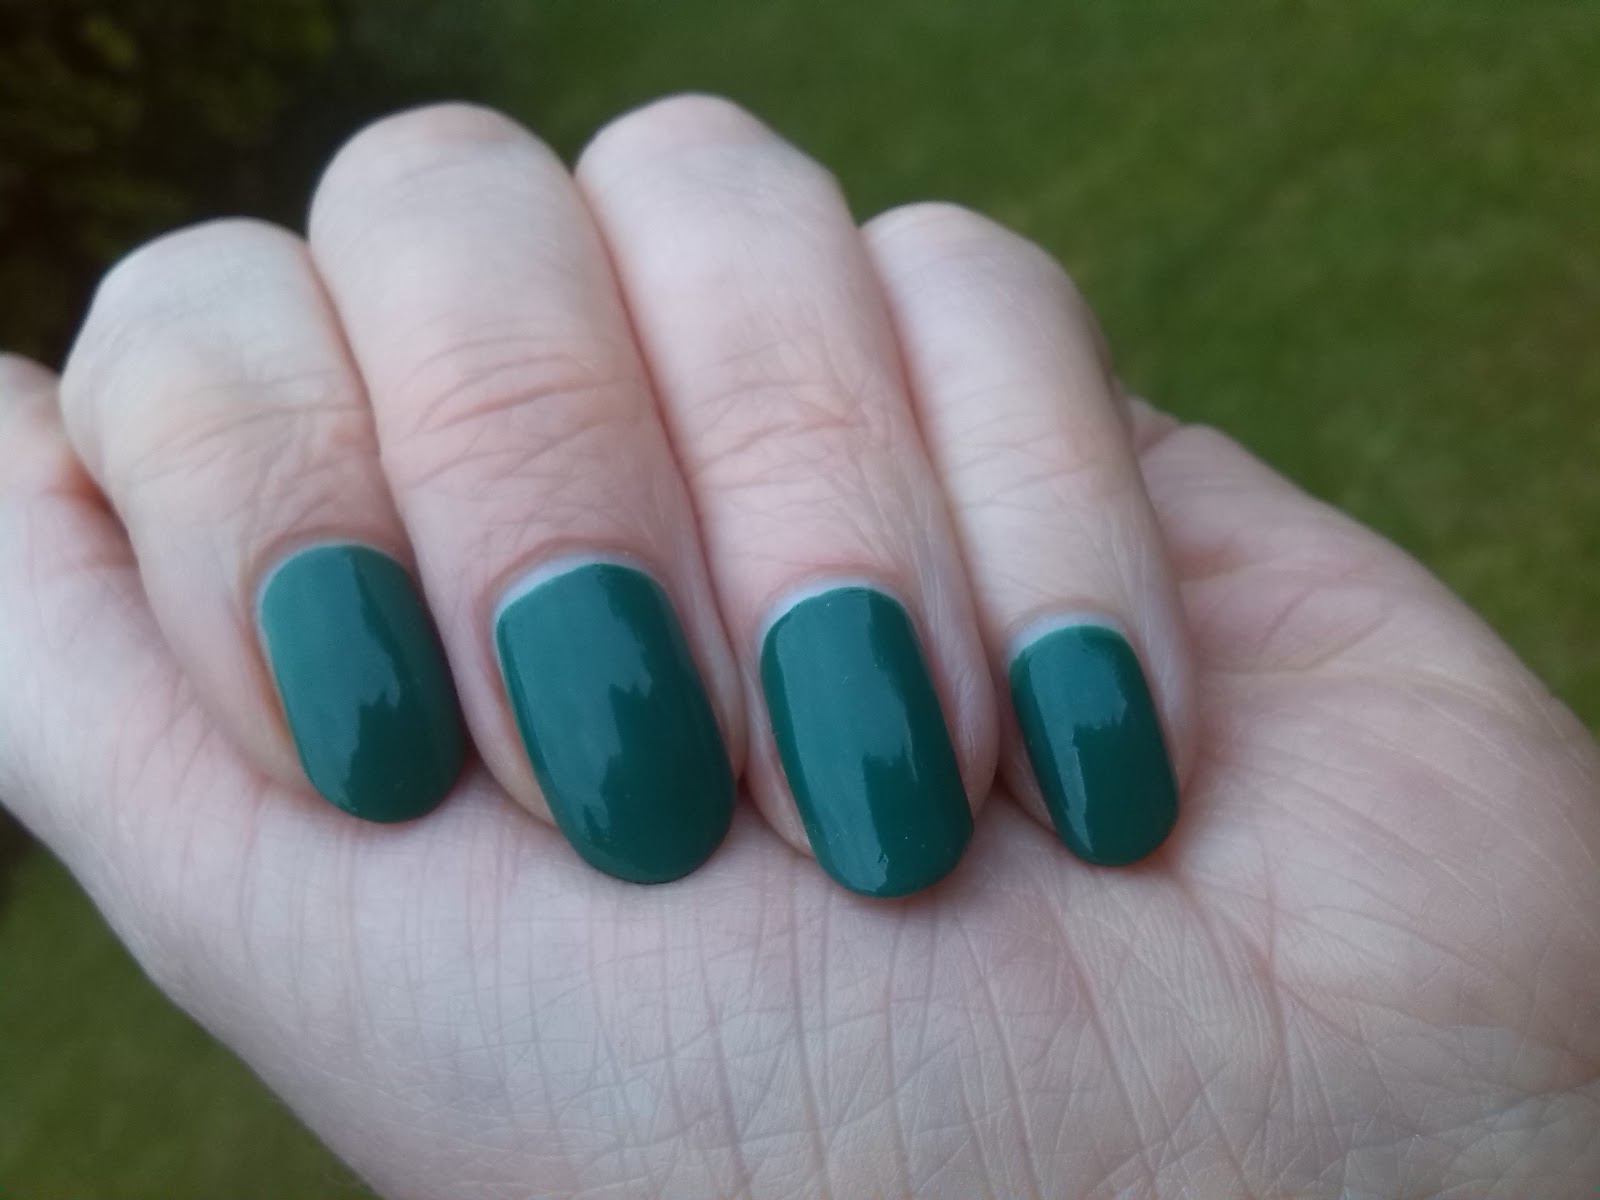 OPI Jade is the New Black